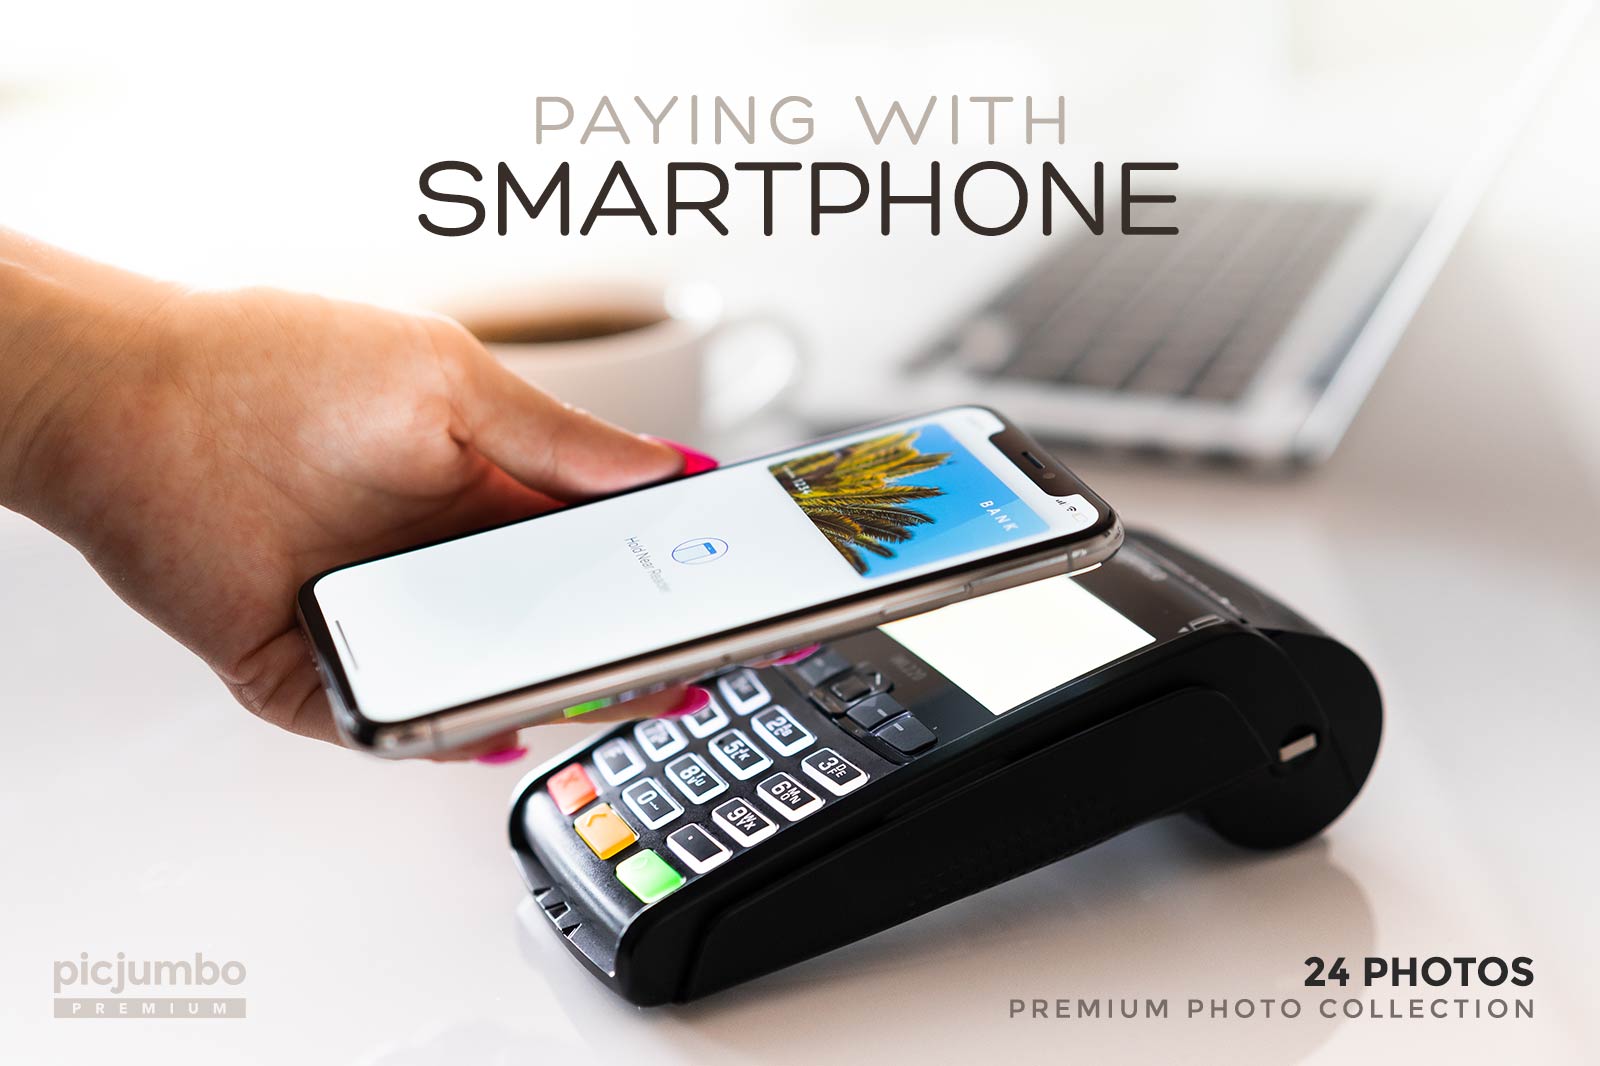 Download hi-res stock photos from our Paying with Smartphone PREMIUM Collection!